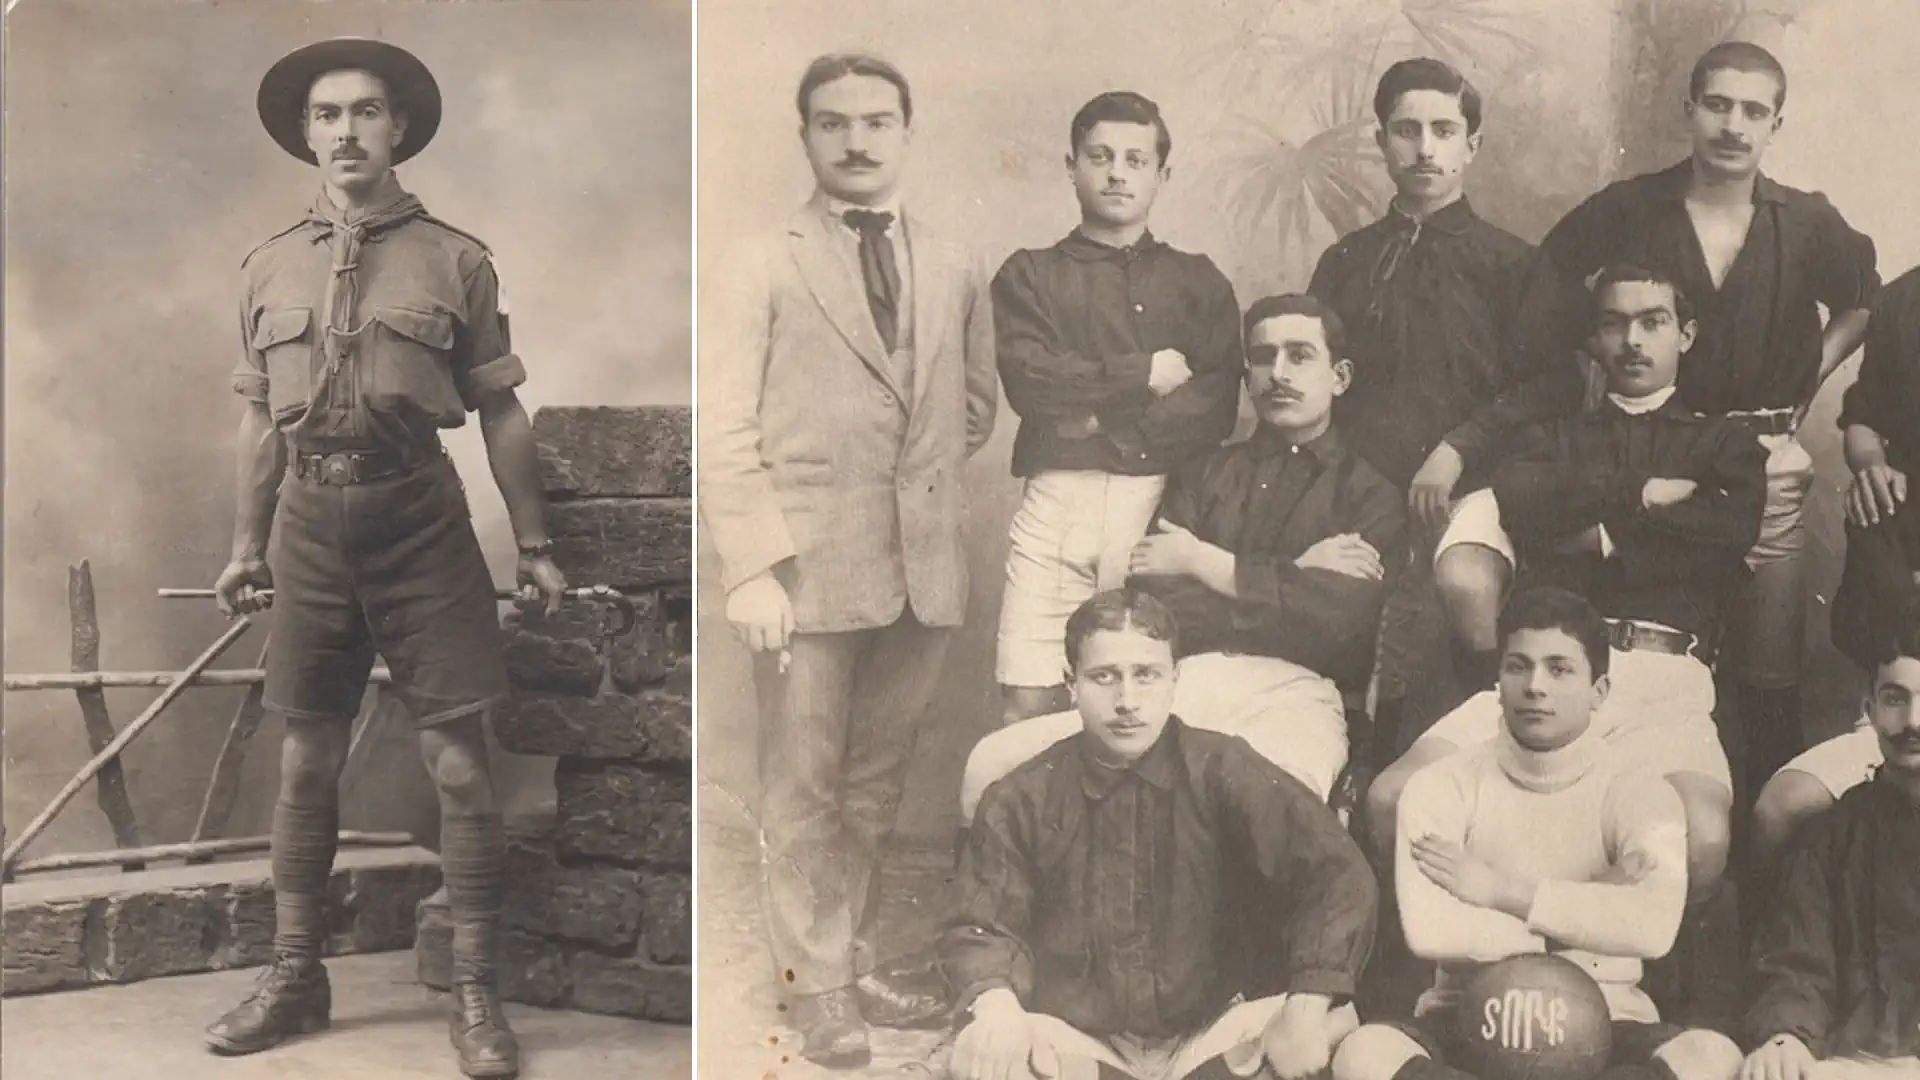 Armenian athletes - victims of the Armenian Genocide in 1915